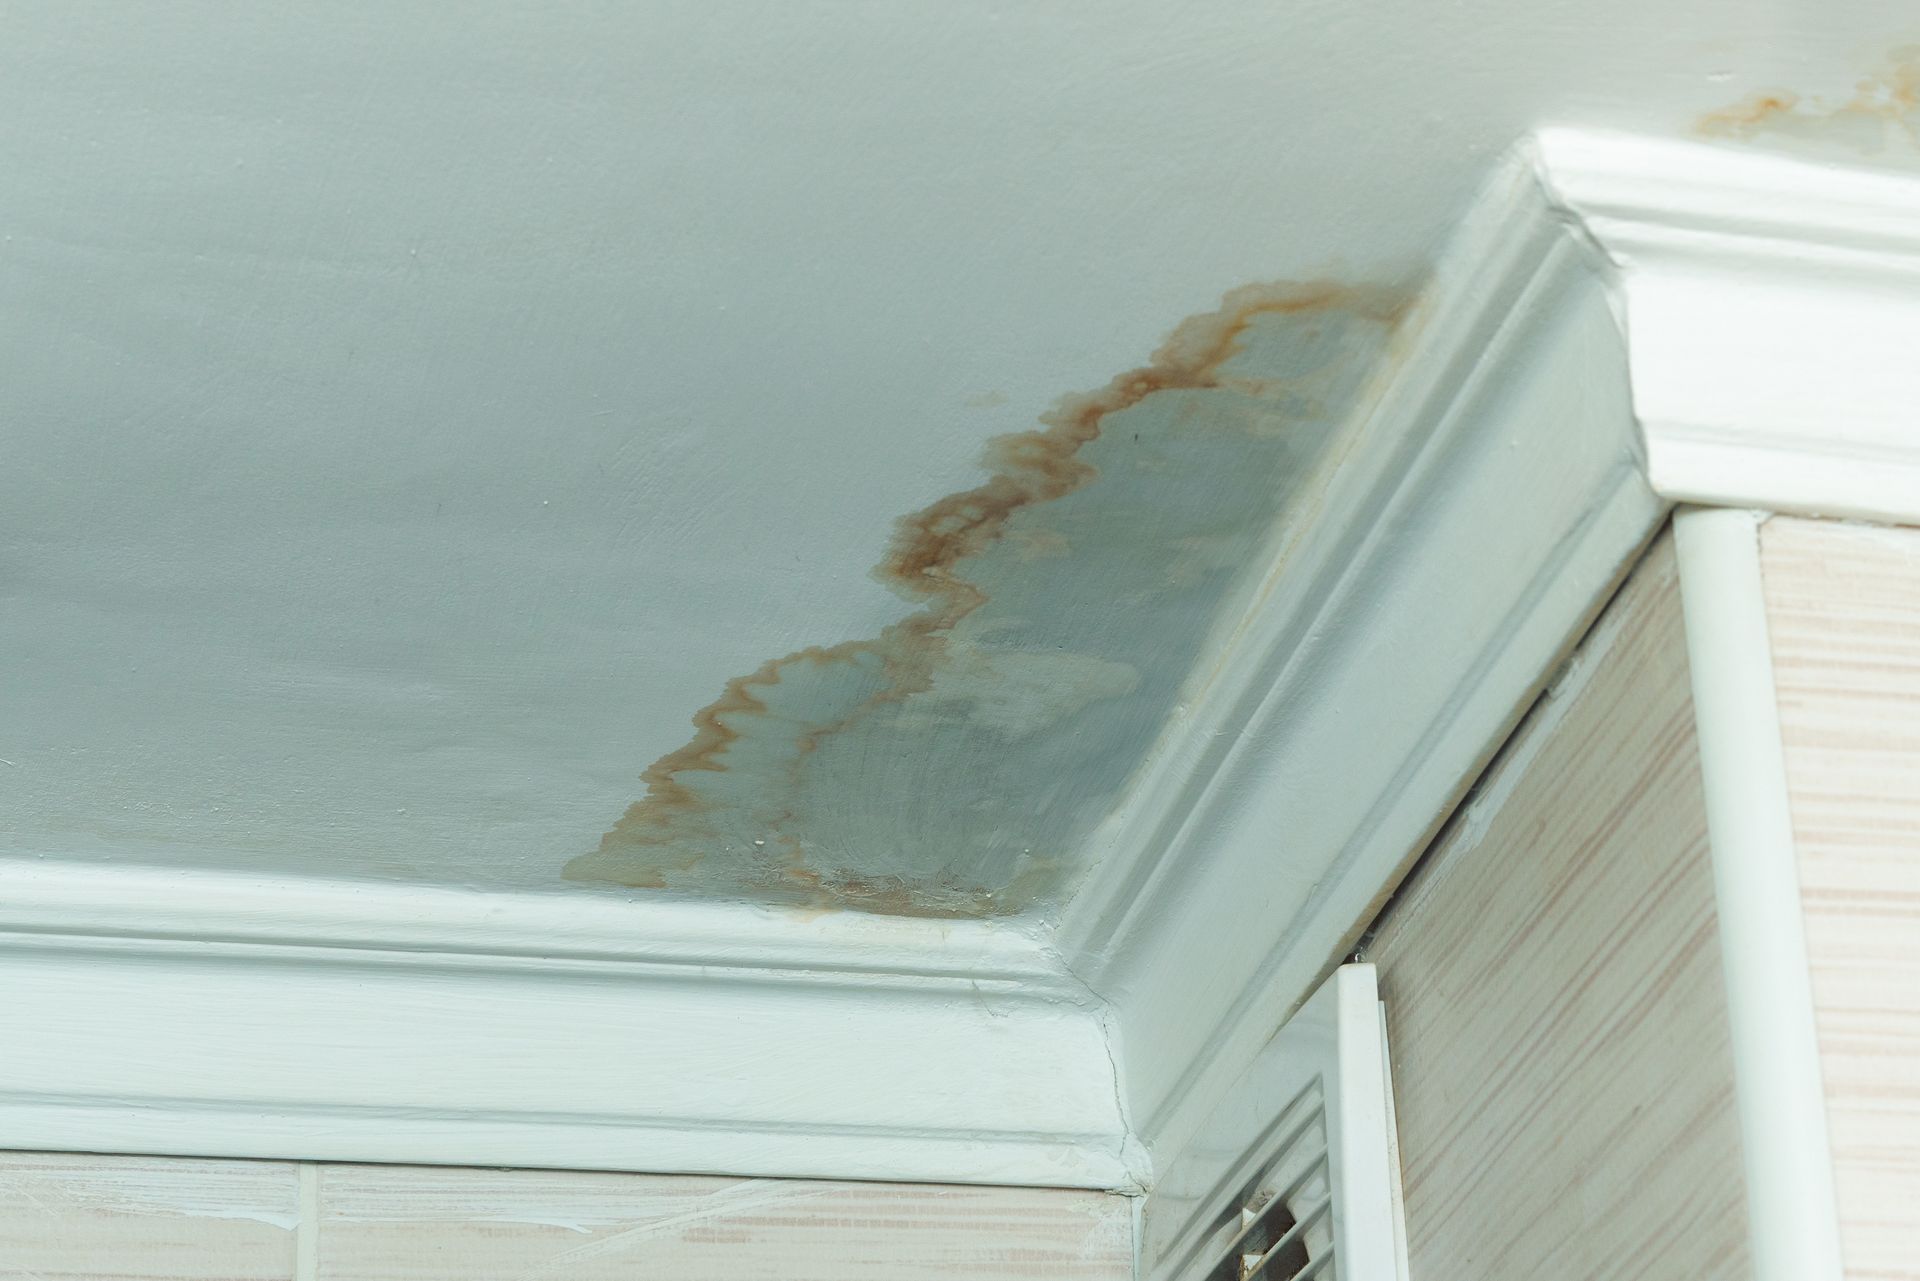 Water Damage Cleaning Services: A Comprehensive Guide to Water Damage Restoration